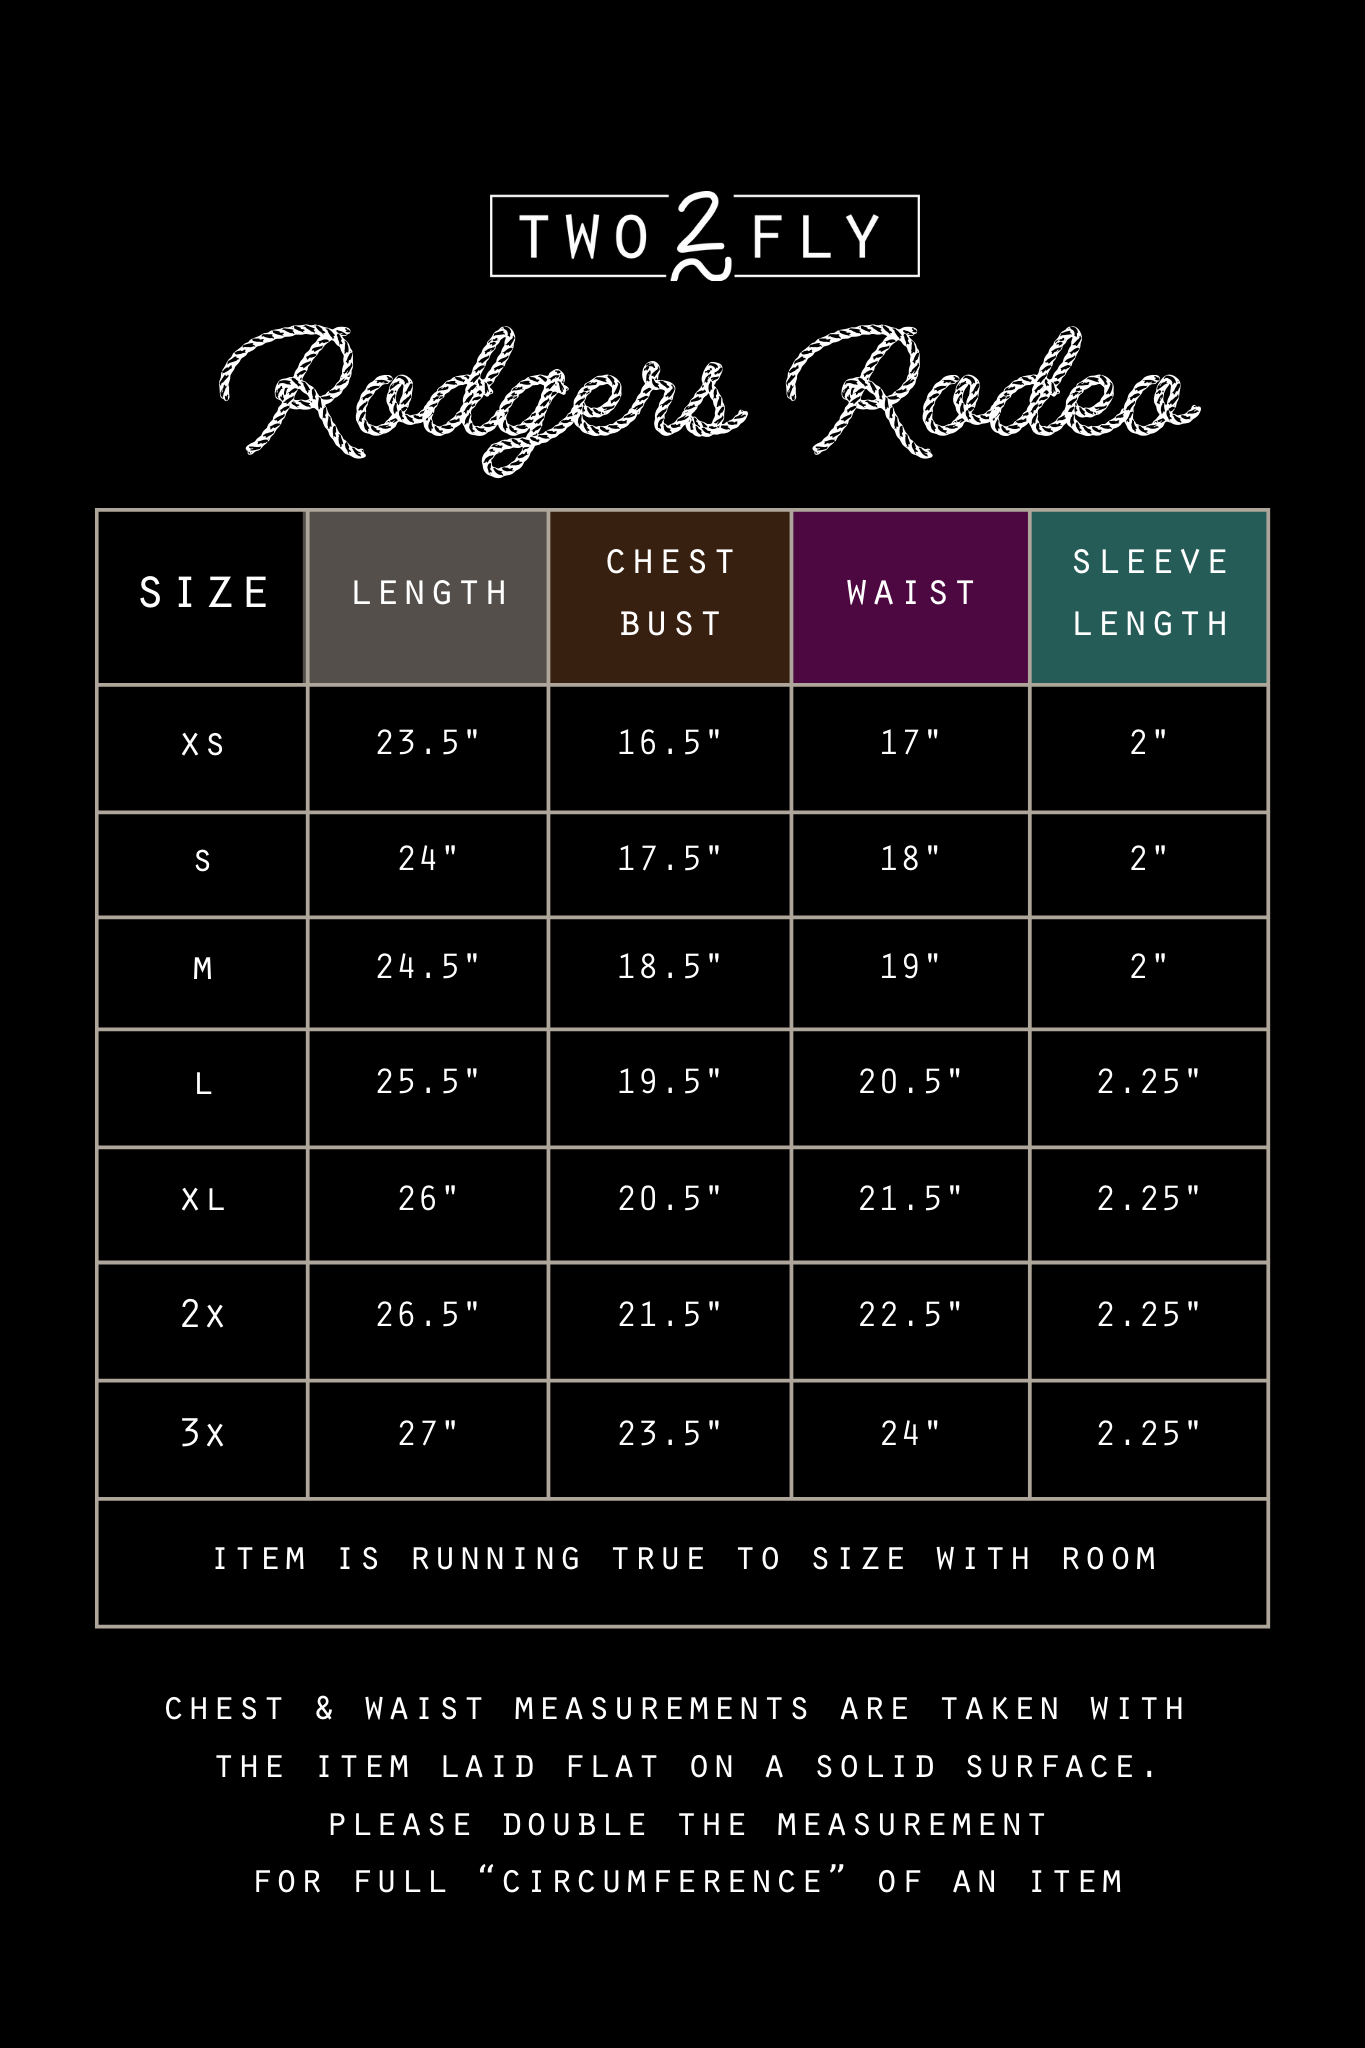 RODGERS RODEO: L